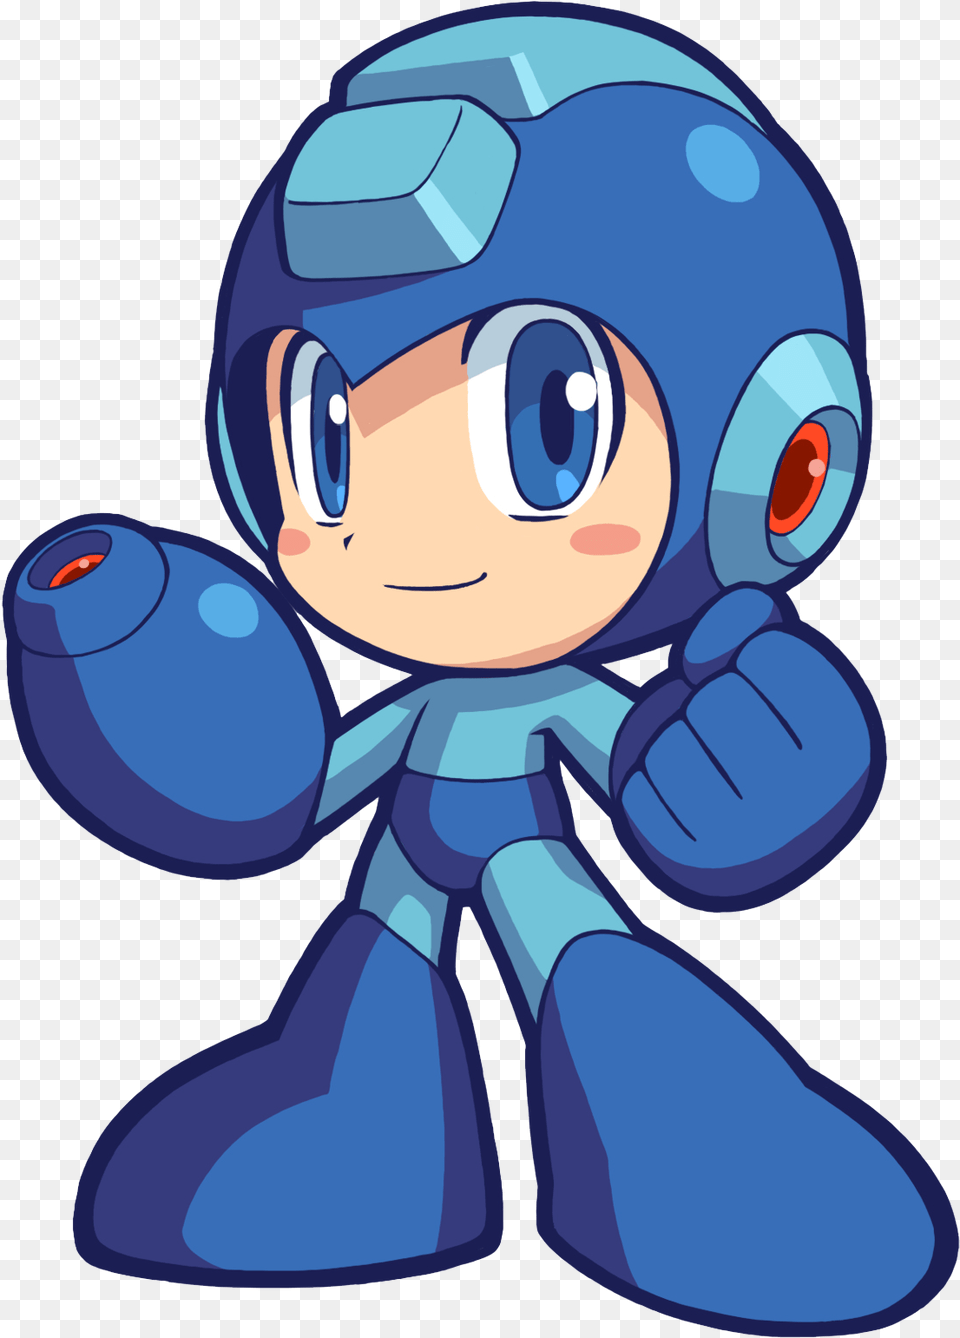 Megaman Images Transparent Free Download Megaman Powered Up, Baby, Person, Face, Head Png Image